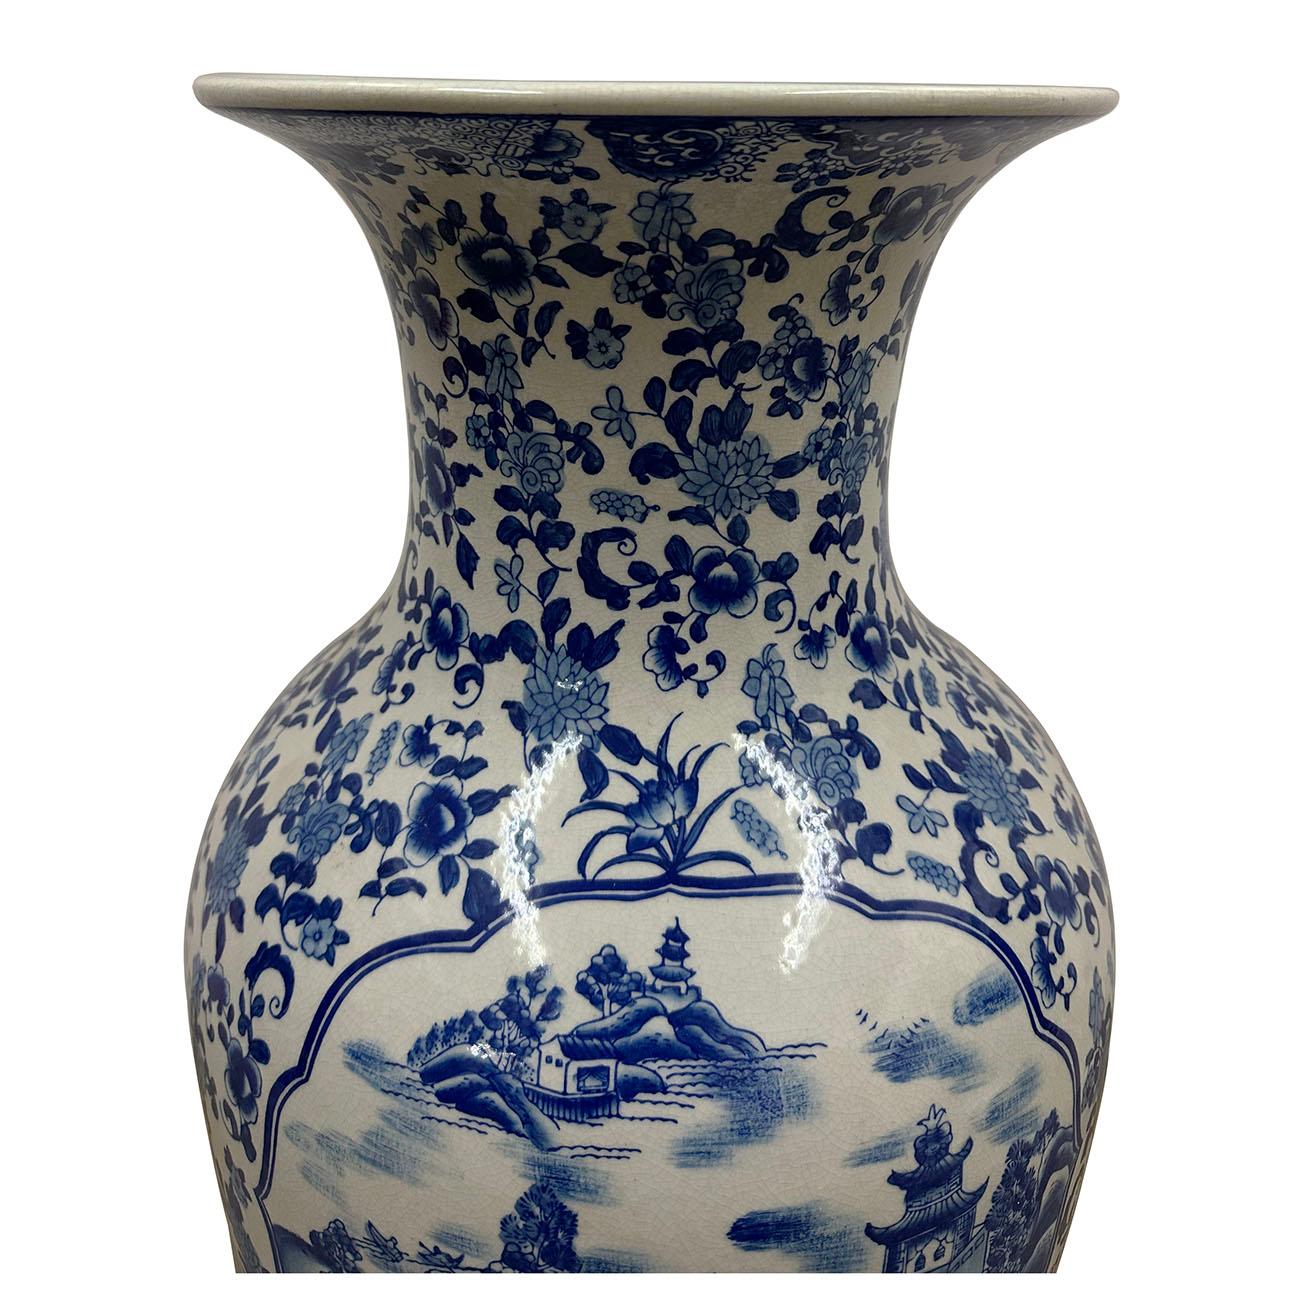 This 19th century blue and white porcelain vase is a classical Chinese vase. The vase features hand painted intricate traditional chinese floral and landscapes in shades of blue on a white background. Chinese ceramics have a long and rich history